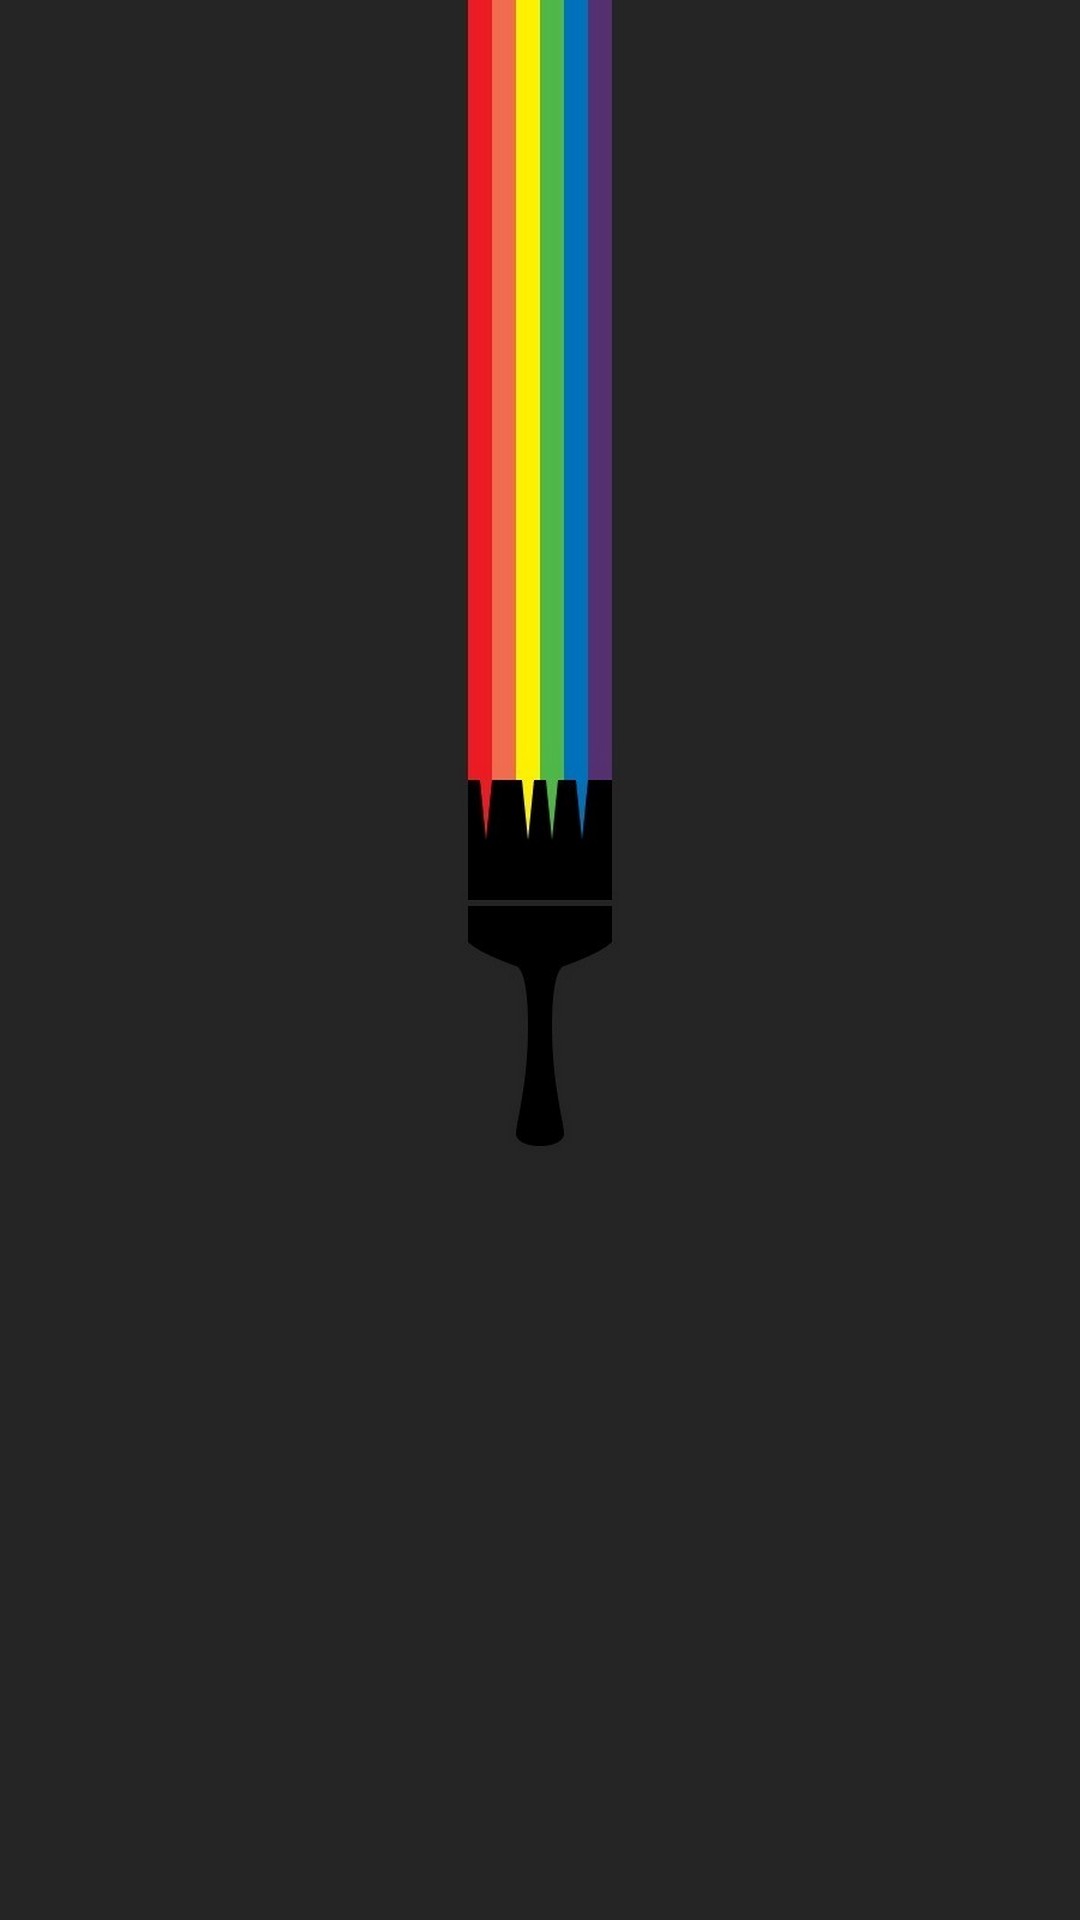 Phones Wallpaper Minimalist with high-resolution 1080x1920 pixel. Download all Mobile Wallpapers and Use them as wallpapers for your iPhone, Tablet, iPad, Android and other mobile devices